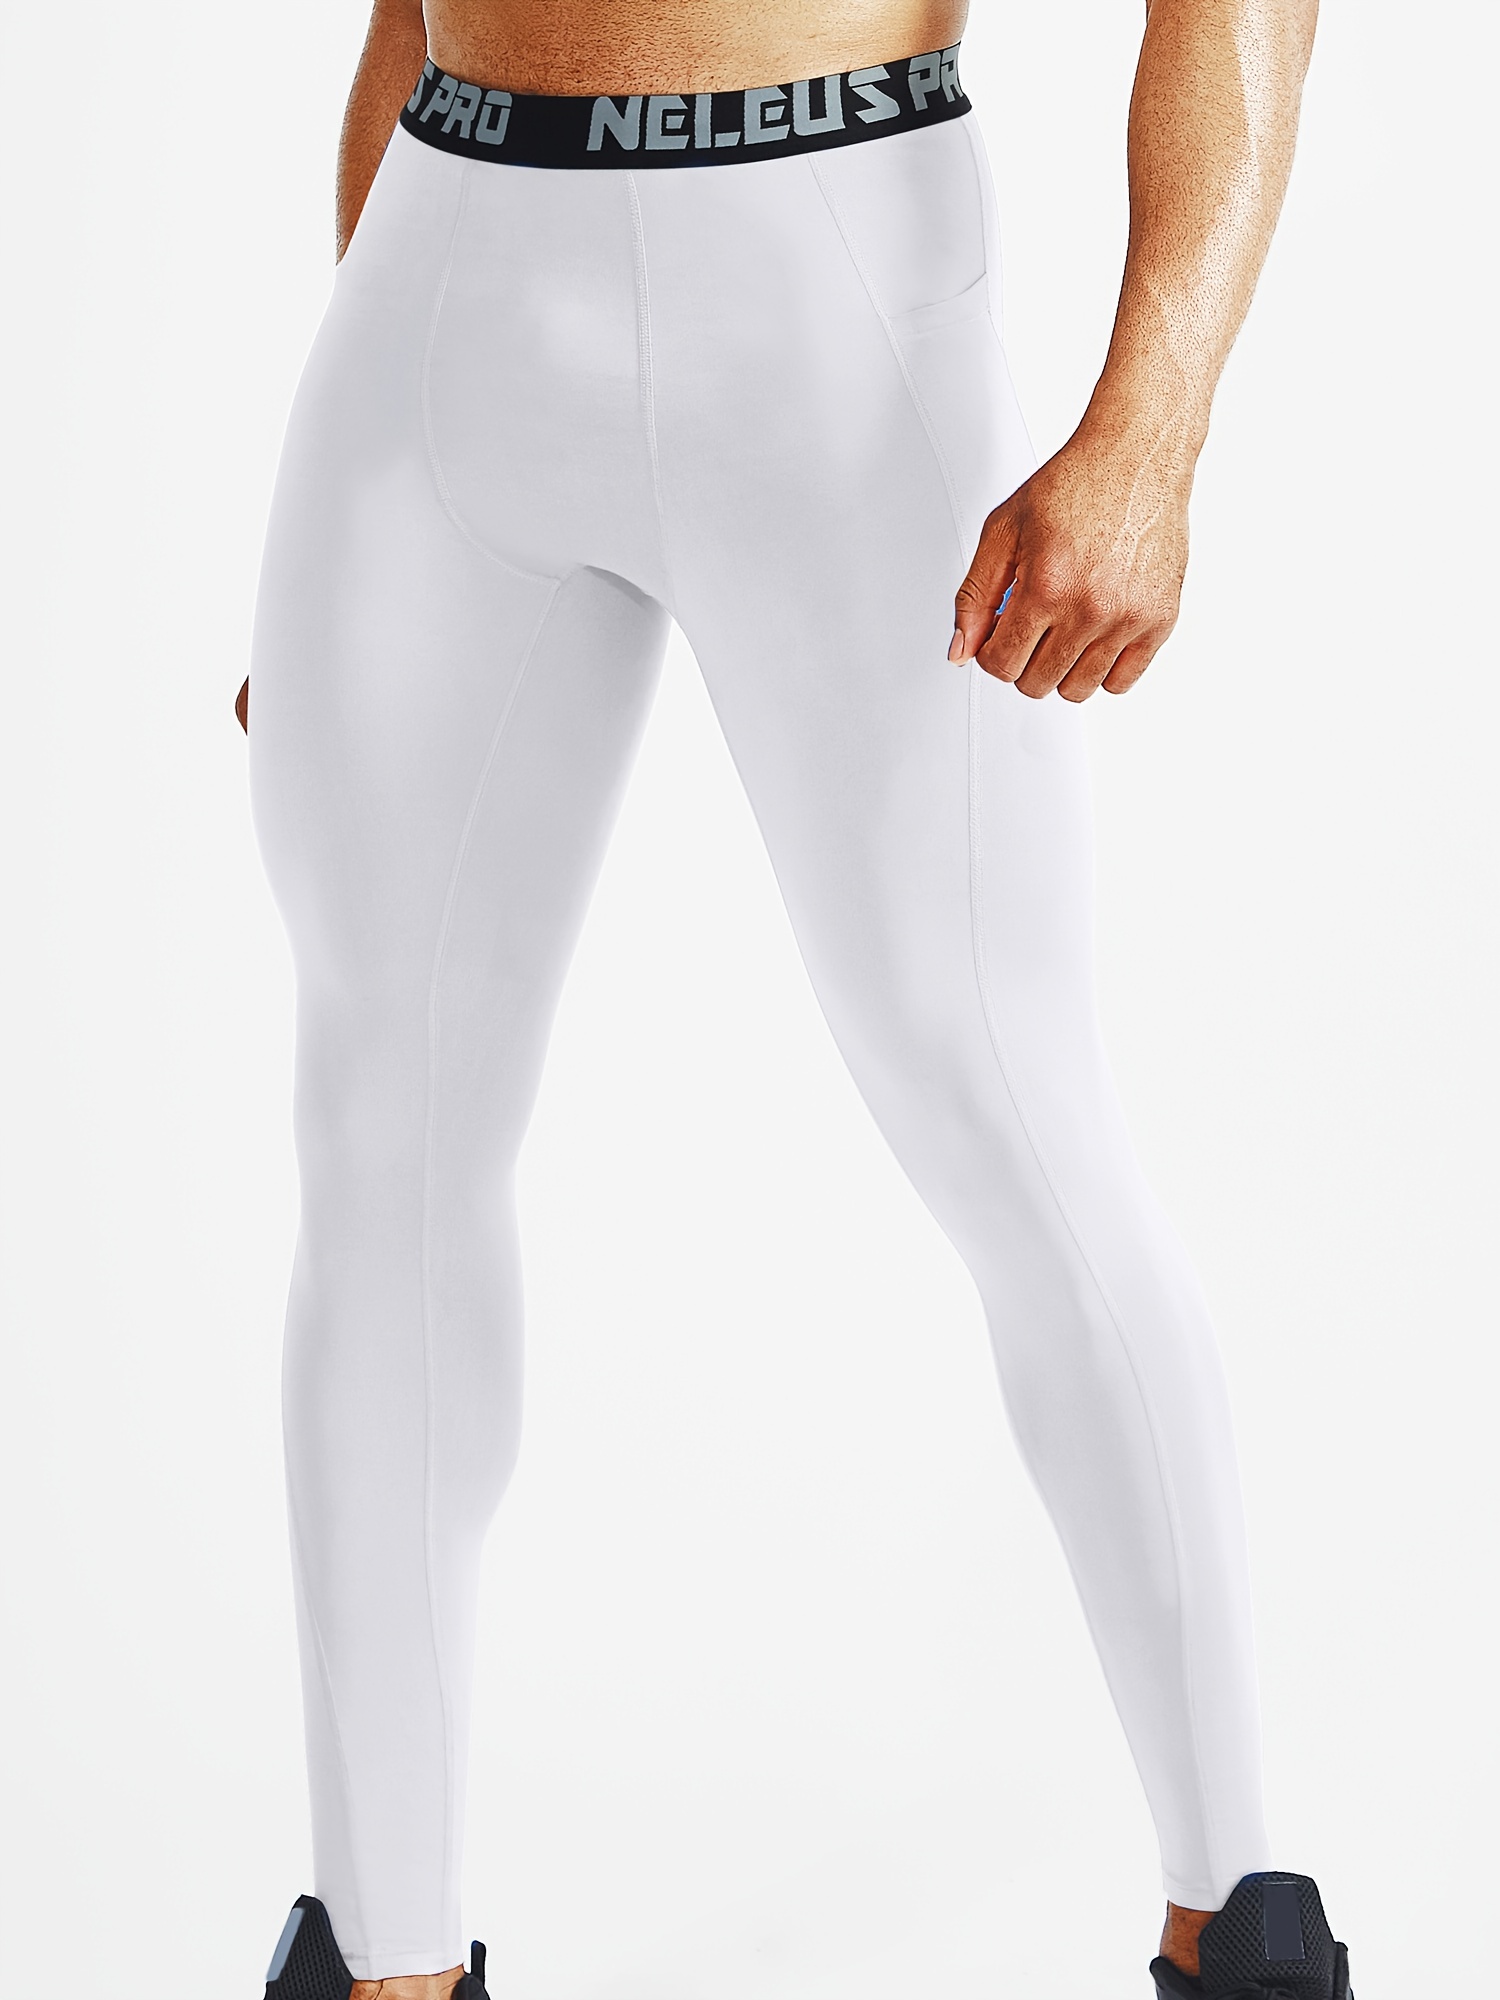 Compression Leggings Fitness Bottoms Men's Running Tights White Basketball  Leggings Winter Sports Base Layer Warm Second Skin